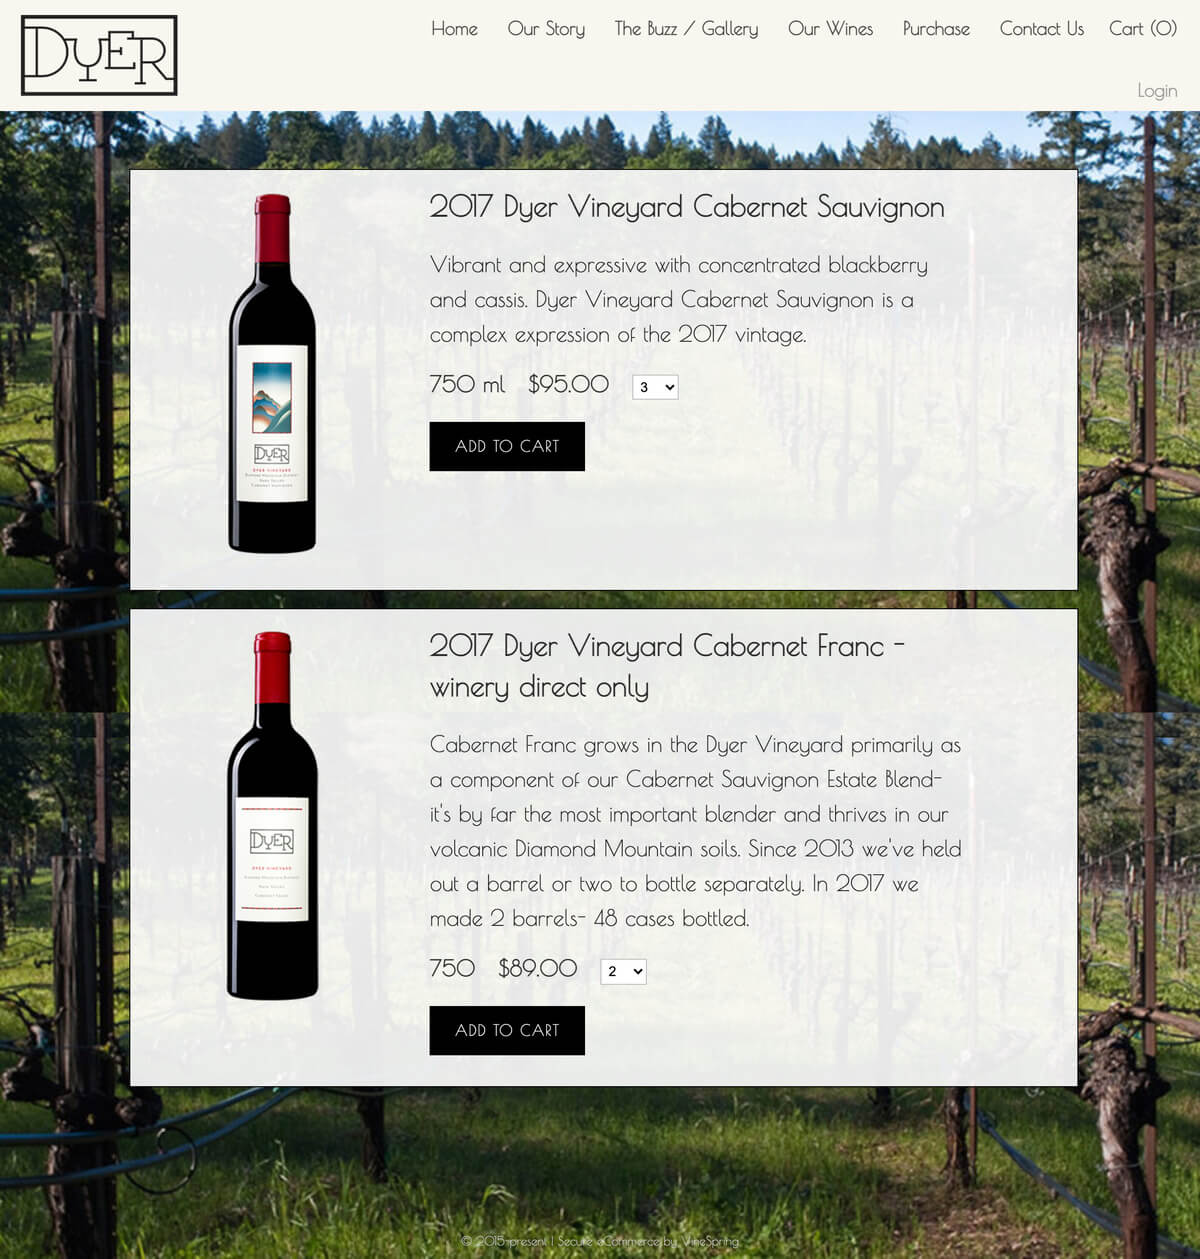 dyer-winery-web-design-store